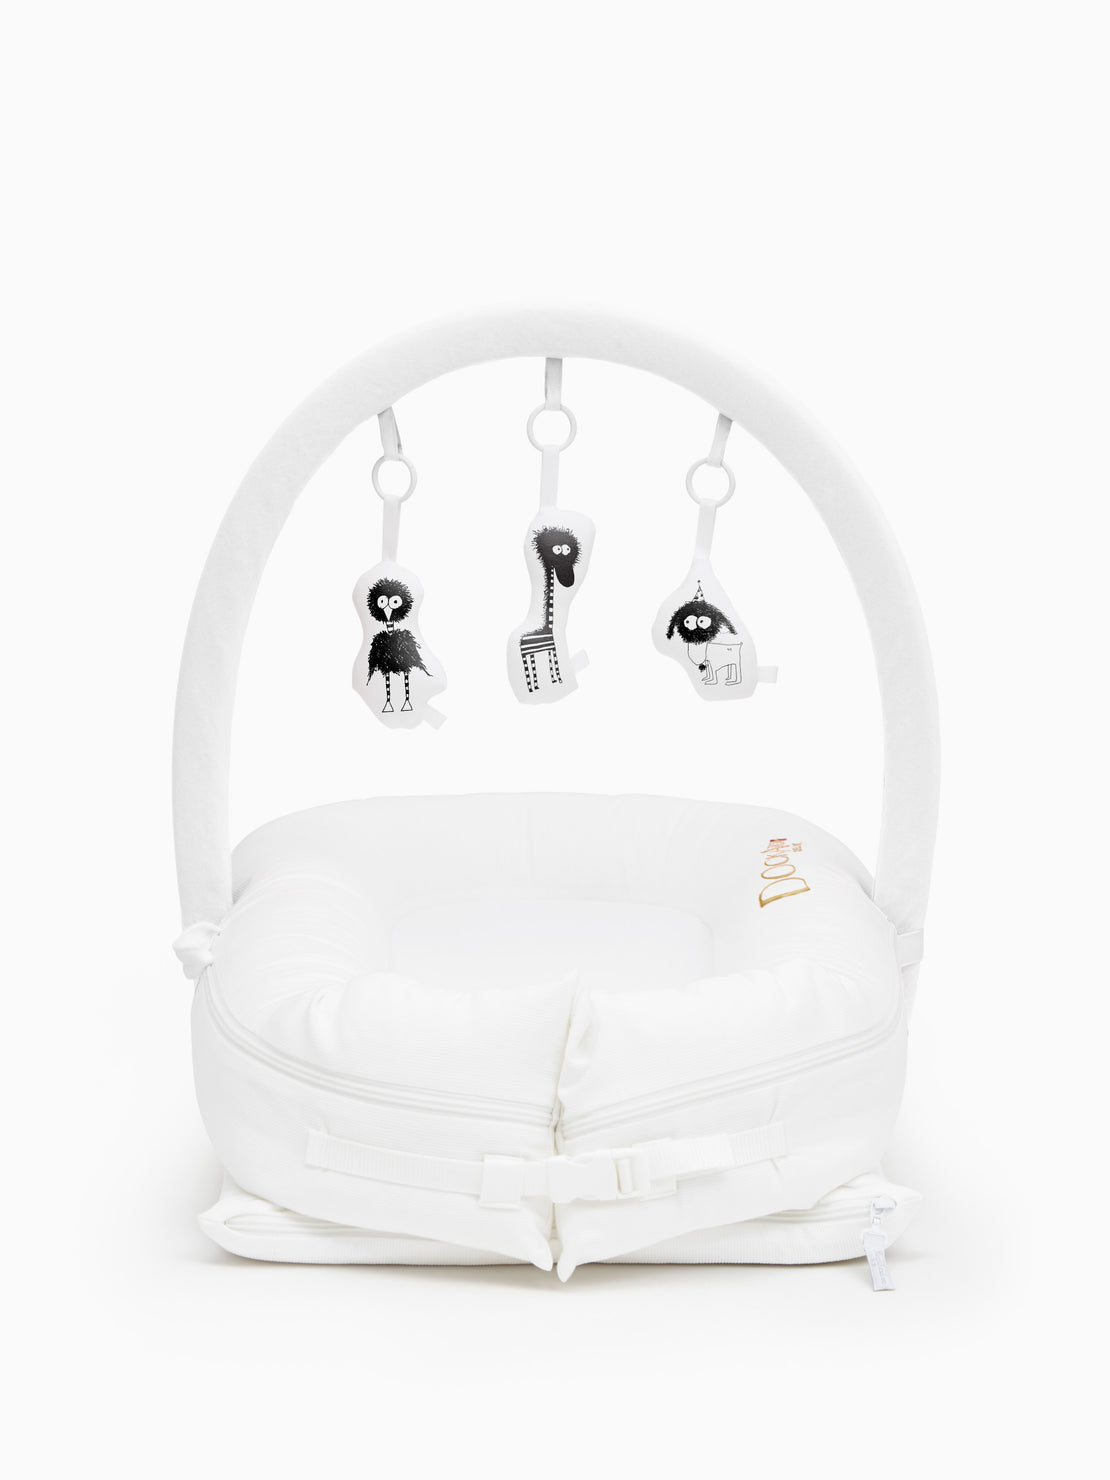 Toy Arch for Deluxe+ Dock - Pristine White – DockATot